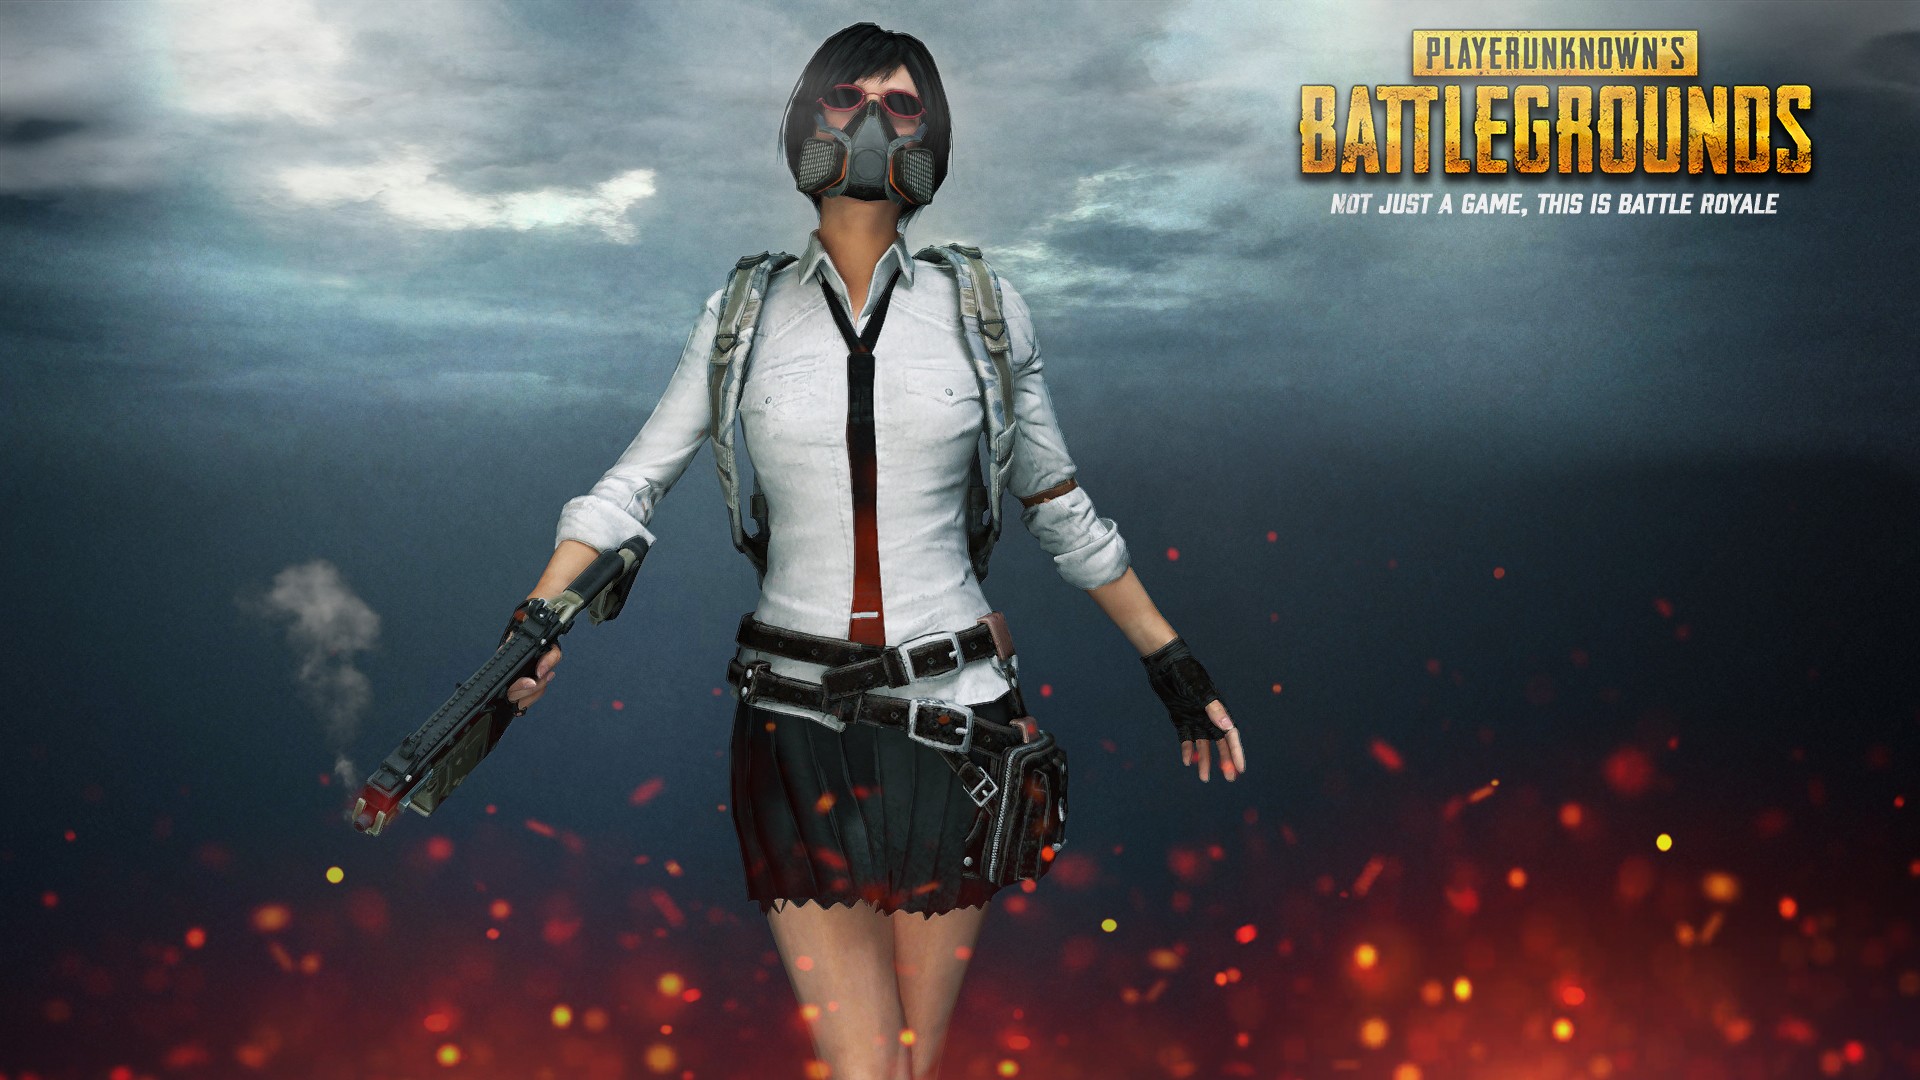 Wallpaper PUBG Xbox Desktop with resolution 1920X1080 pixel. You can use this wallpaper as background for your desktop Computer Screensavers, Android or iPhone smartphones